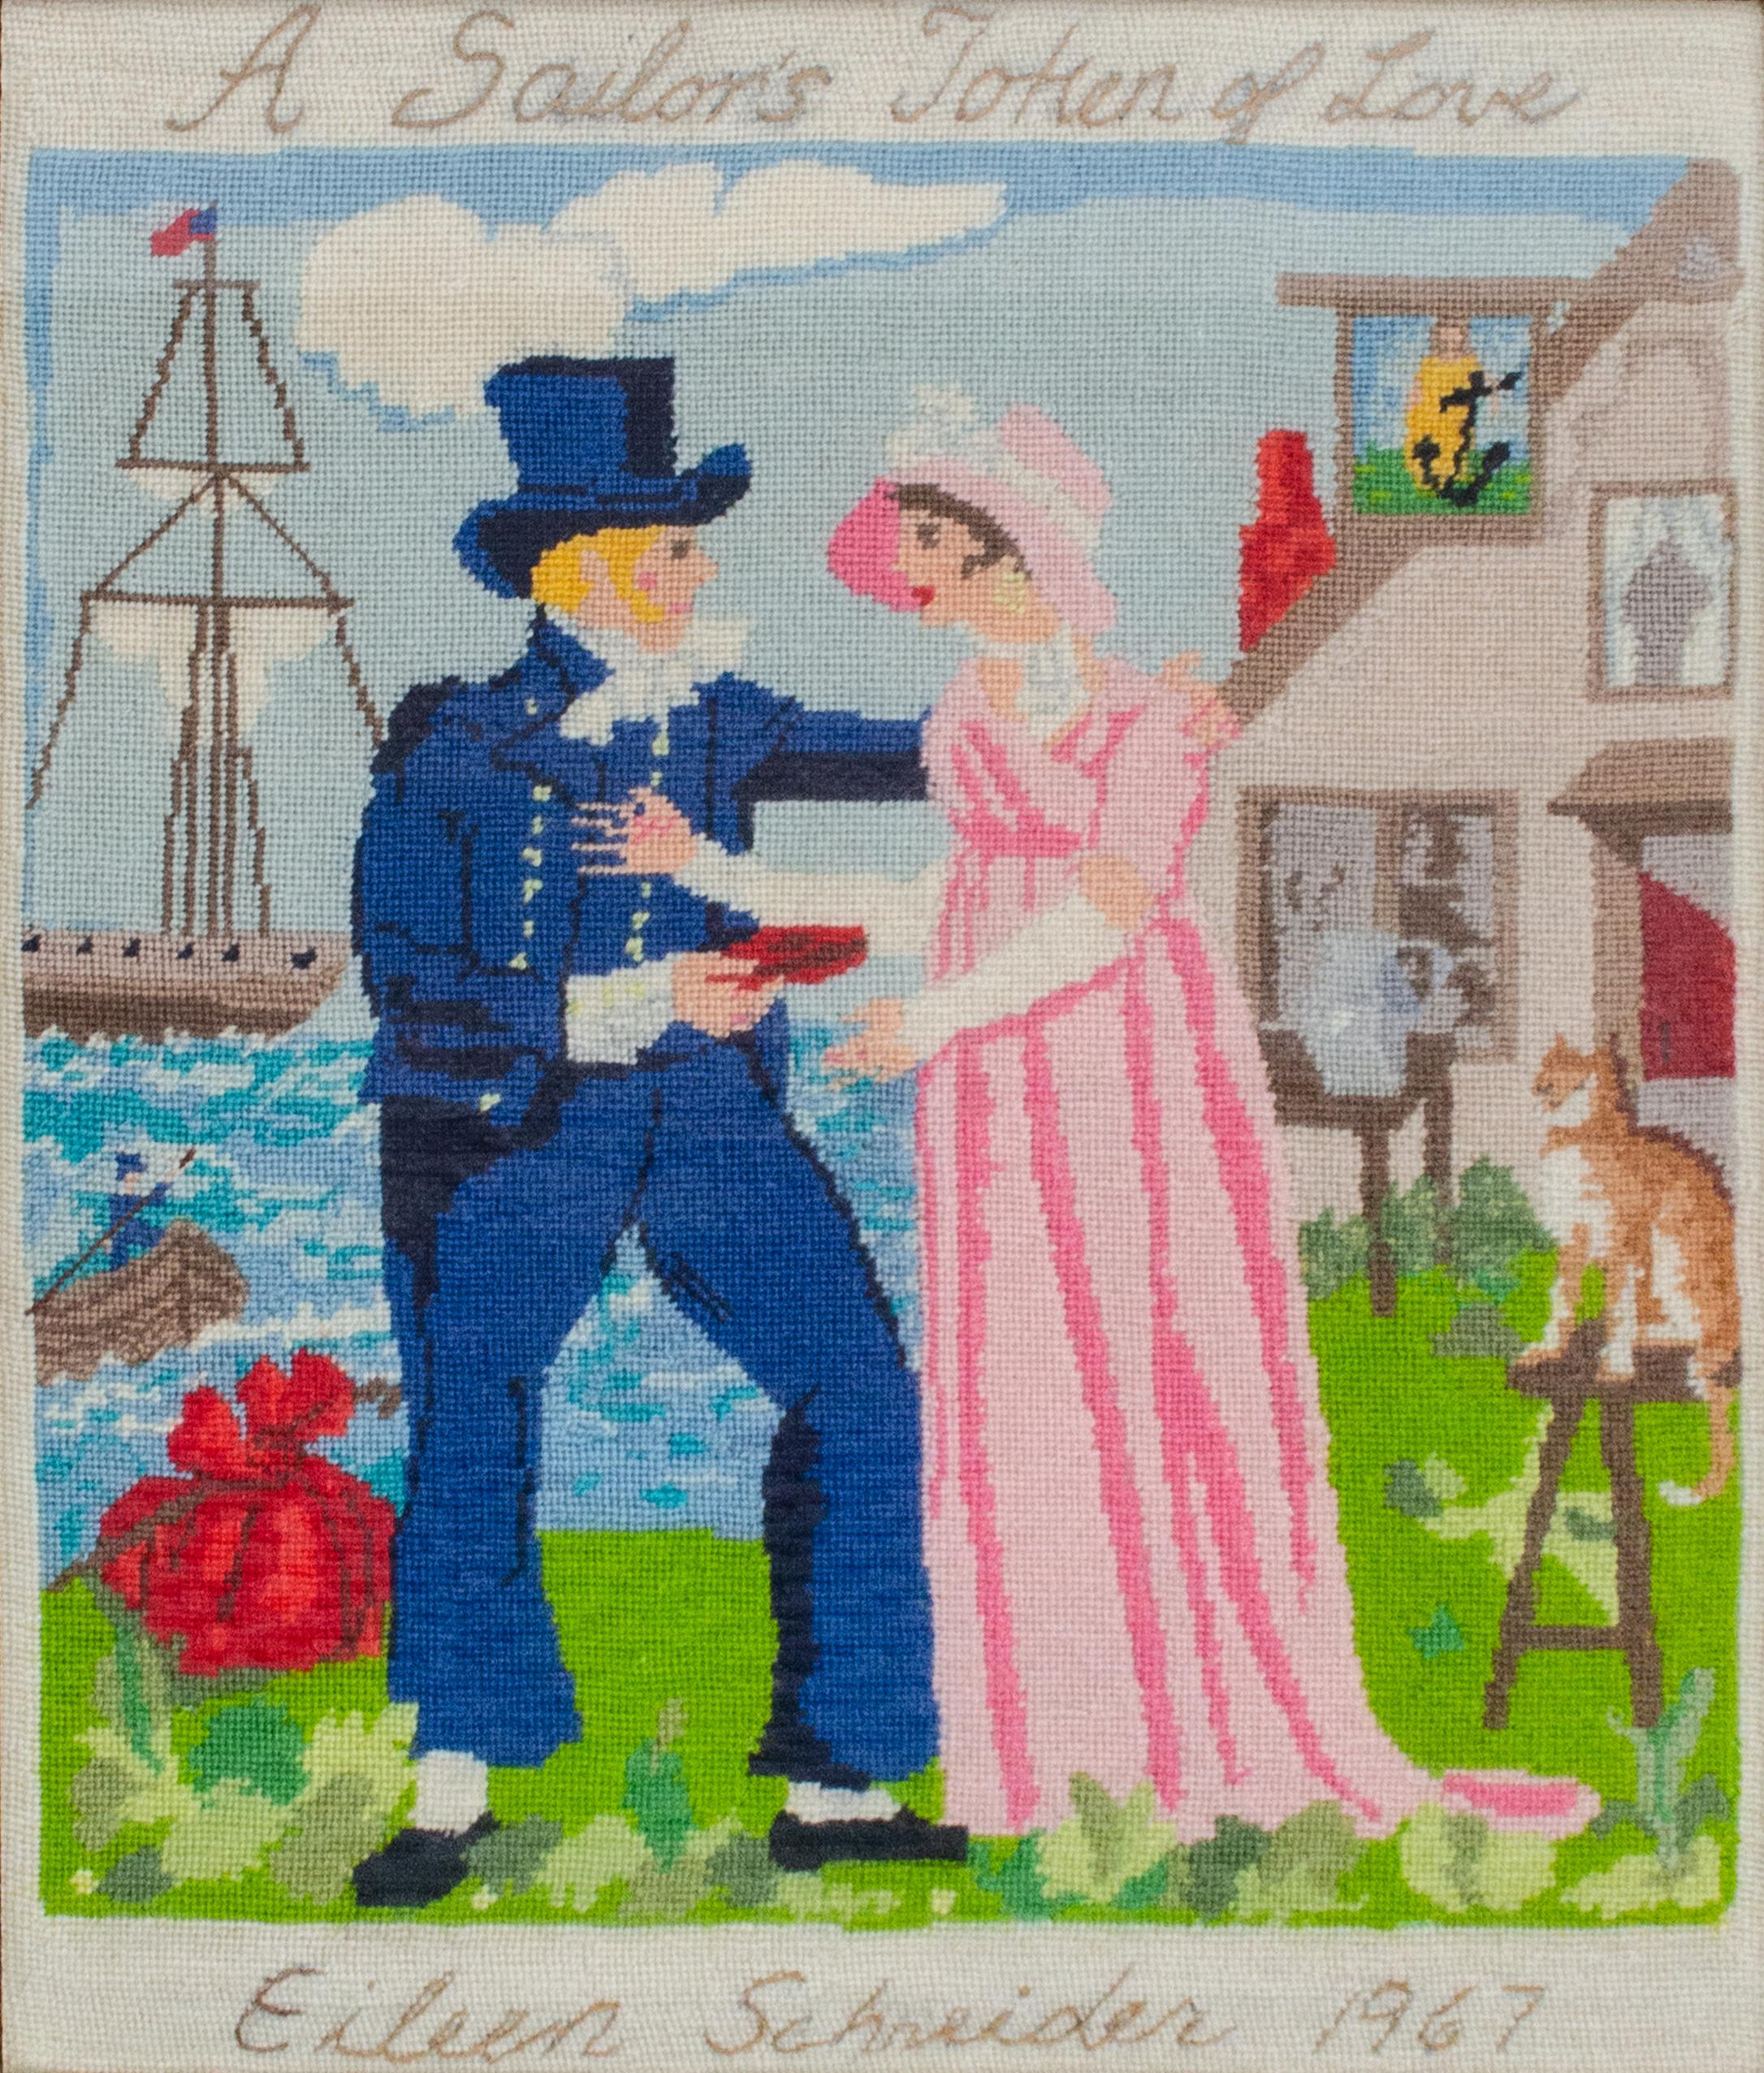 Eileen Schneider (Canadian-American, 1927-2022)
A Sailor's Token of Love, 1967
Needlepoint composition - likely cotton
Framed: 17 1/2 x 15 x 1 in.

Eileen Theresa Hamilton was born on September 17, 1927, in St. Catharine’s, Ontario, Canada. Eileen